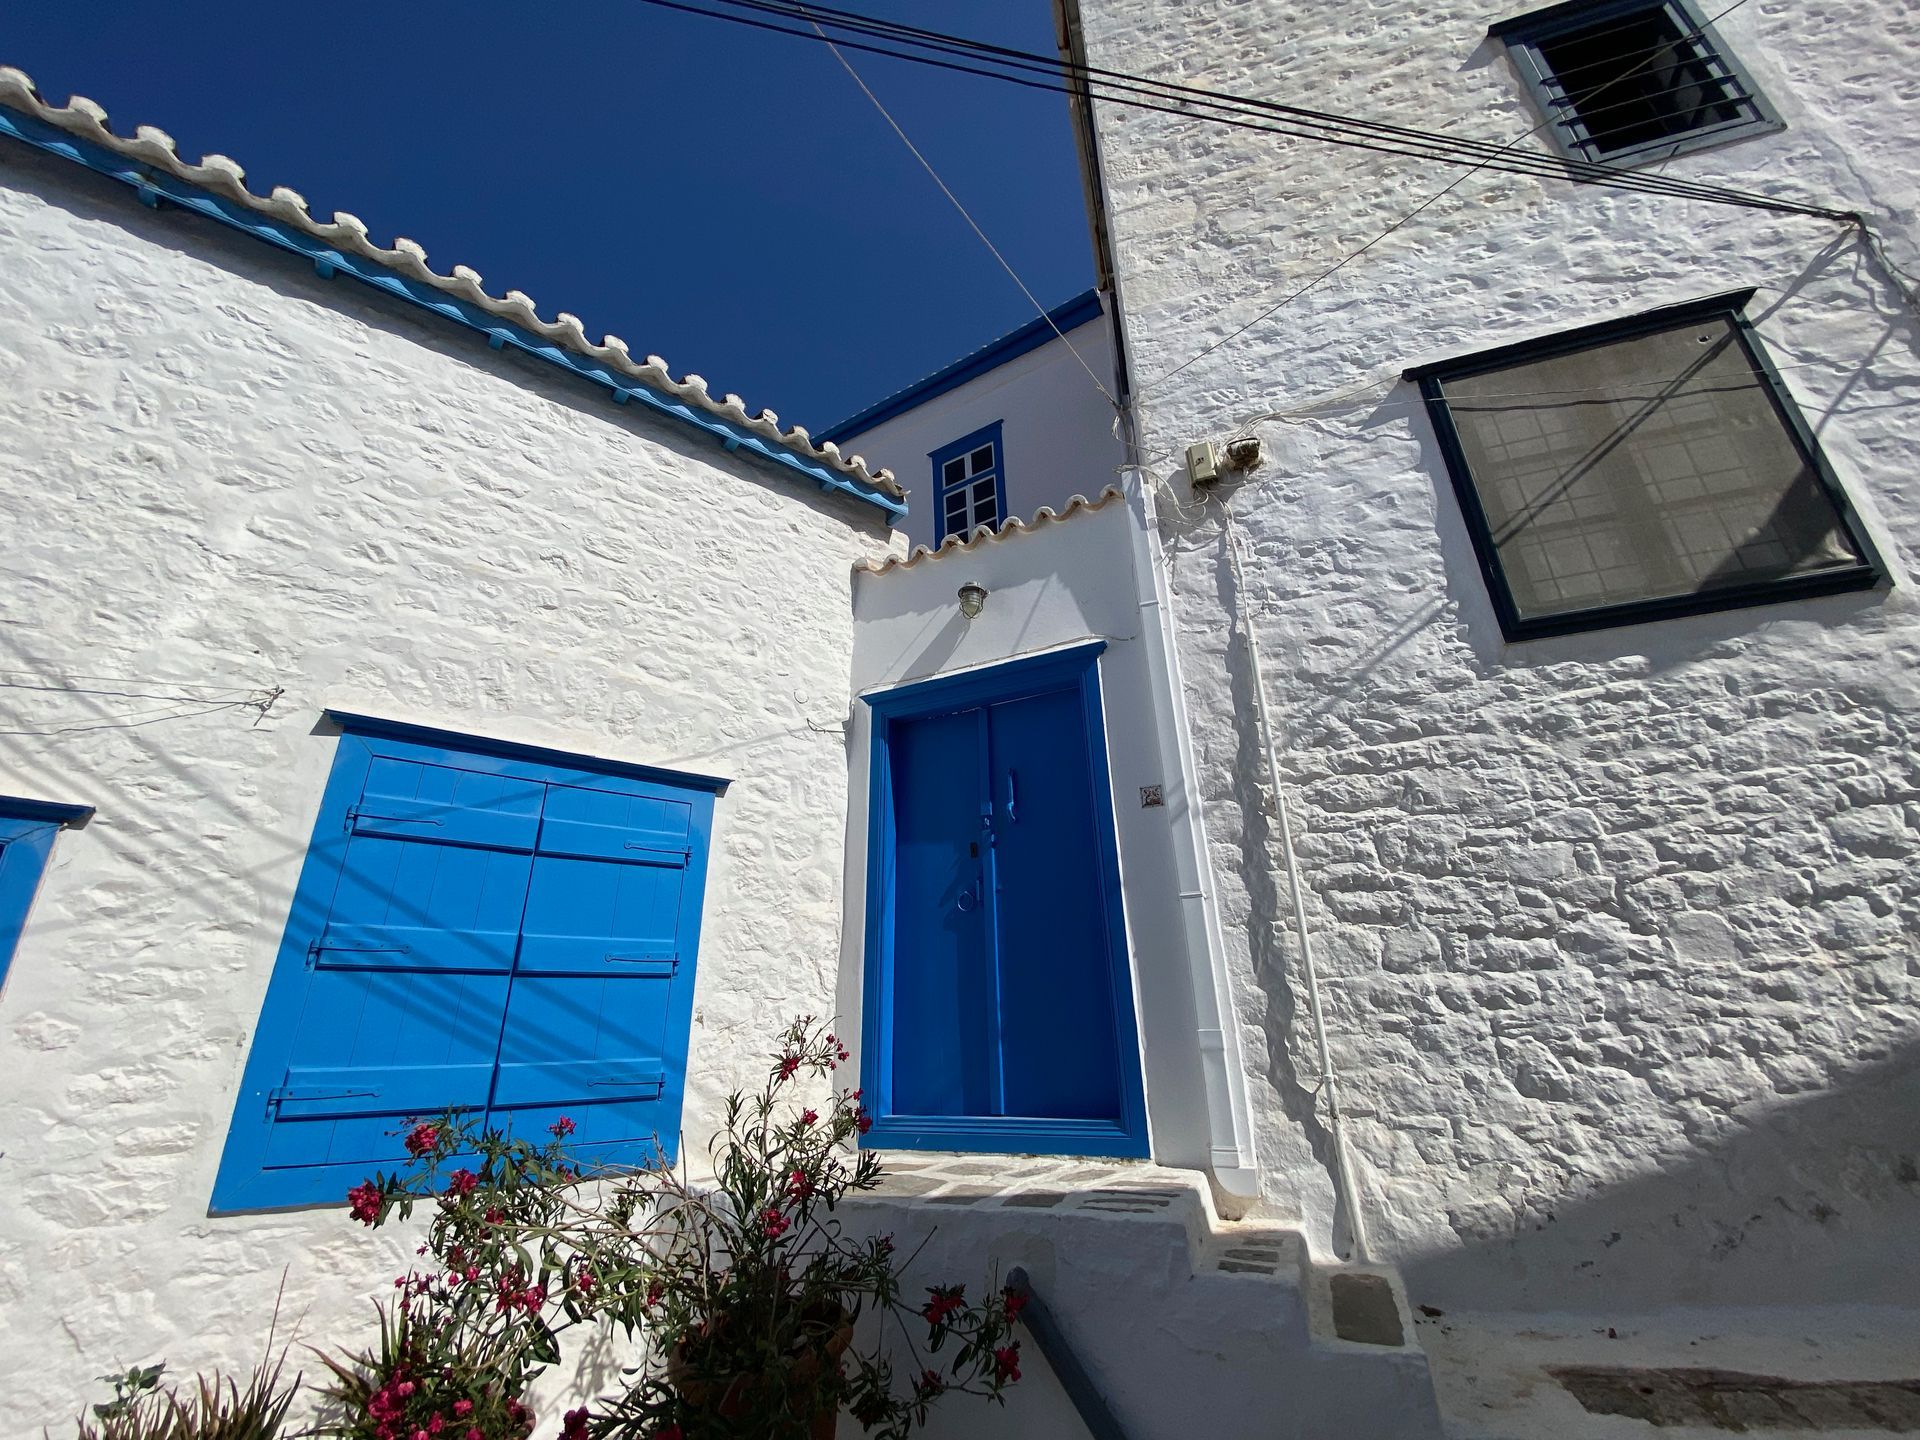 Avlaki Haven House - Private Holiday Houses on Hydra - Accommodation on Hydra Island Greece.